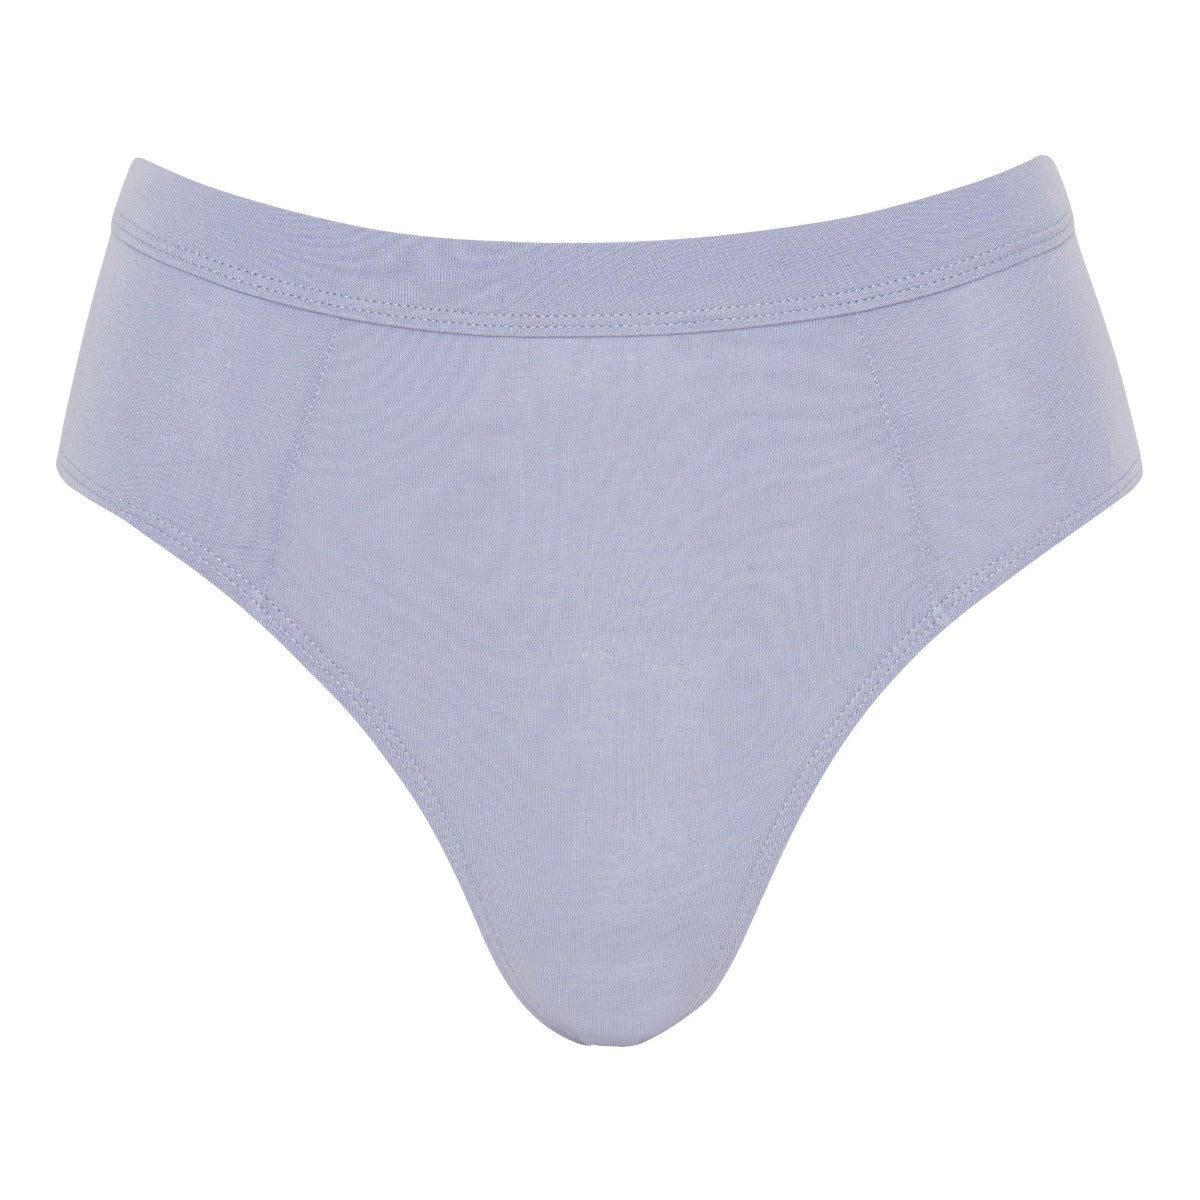 Moons & Junes: Ruth Organic Cotton High-Waisted Brief - Blue